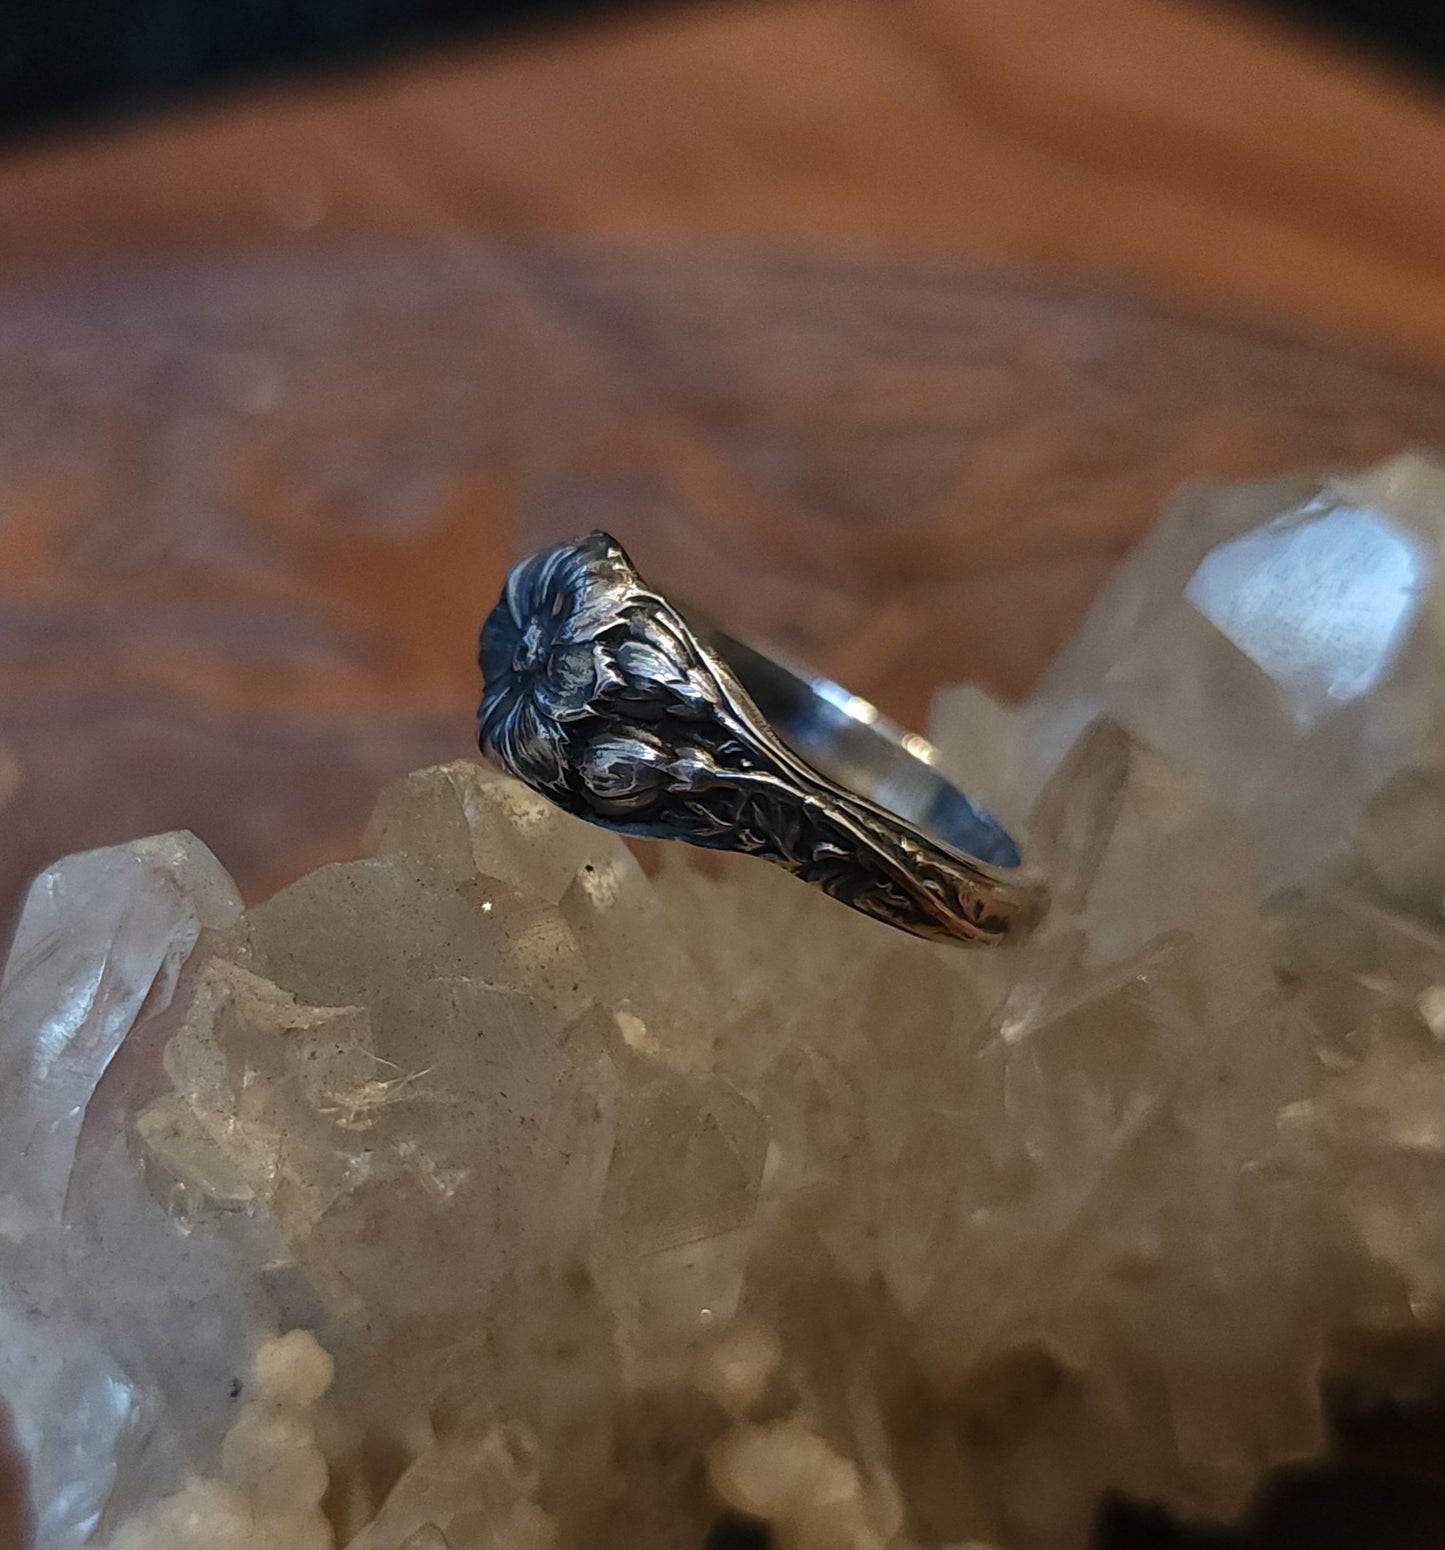 Handcrafted Floral Sterling Silver Ring